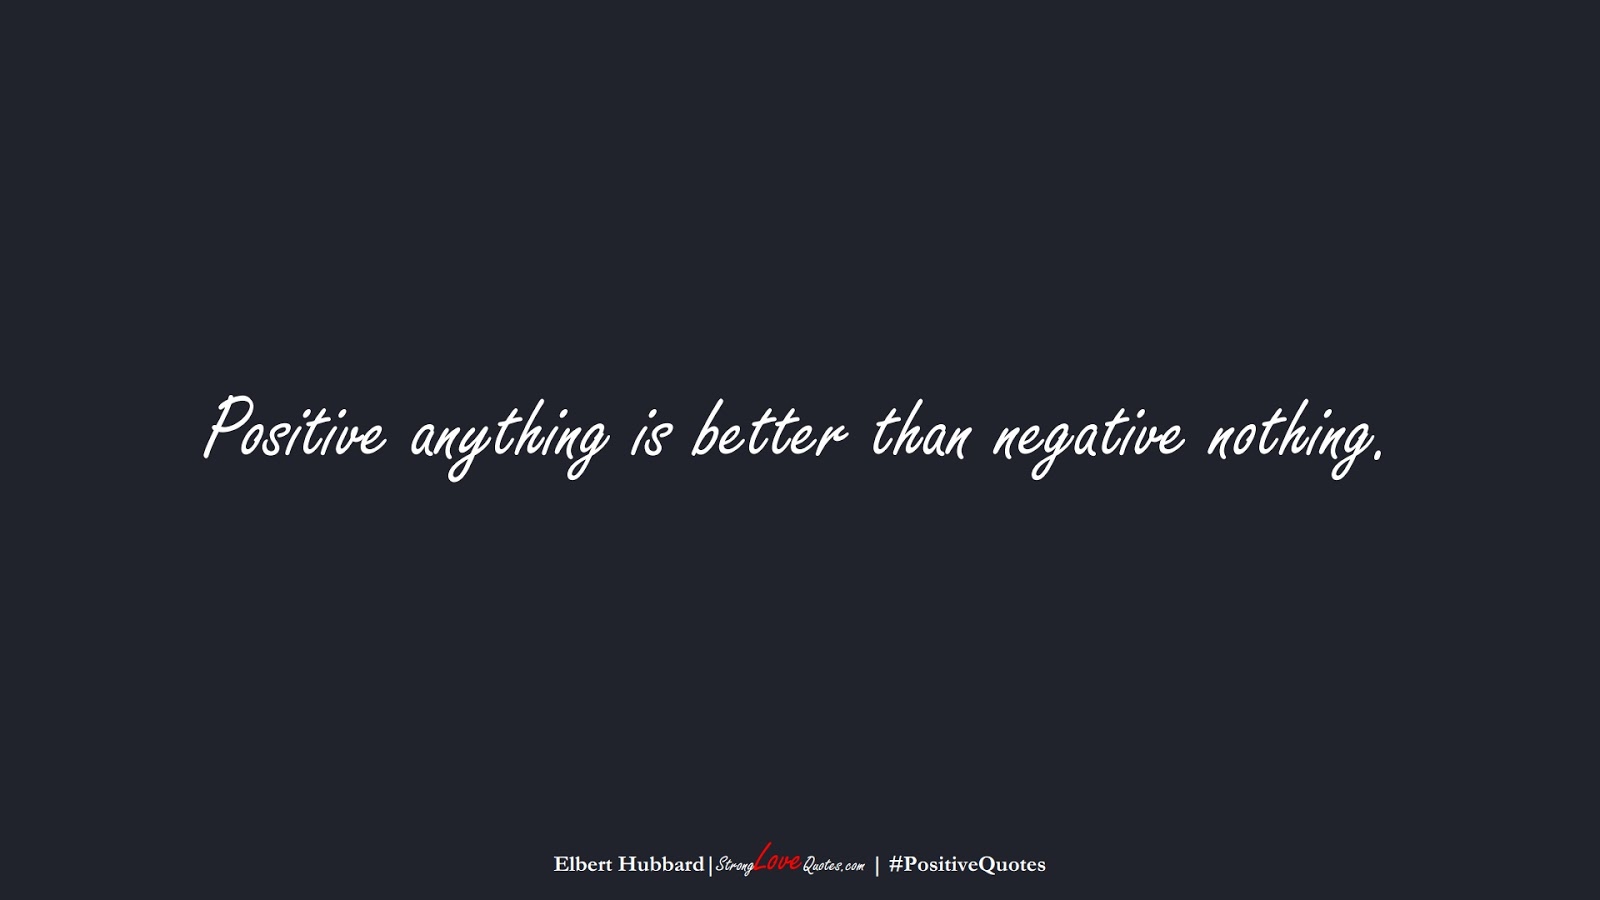 Positive anything is better than negative nothing. (Elbert Hubbard);  #PositiveQuotes